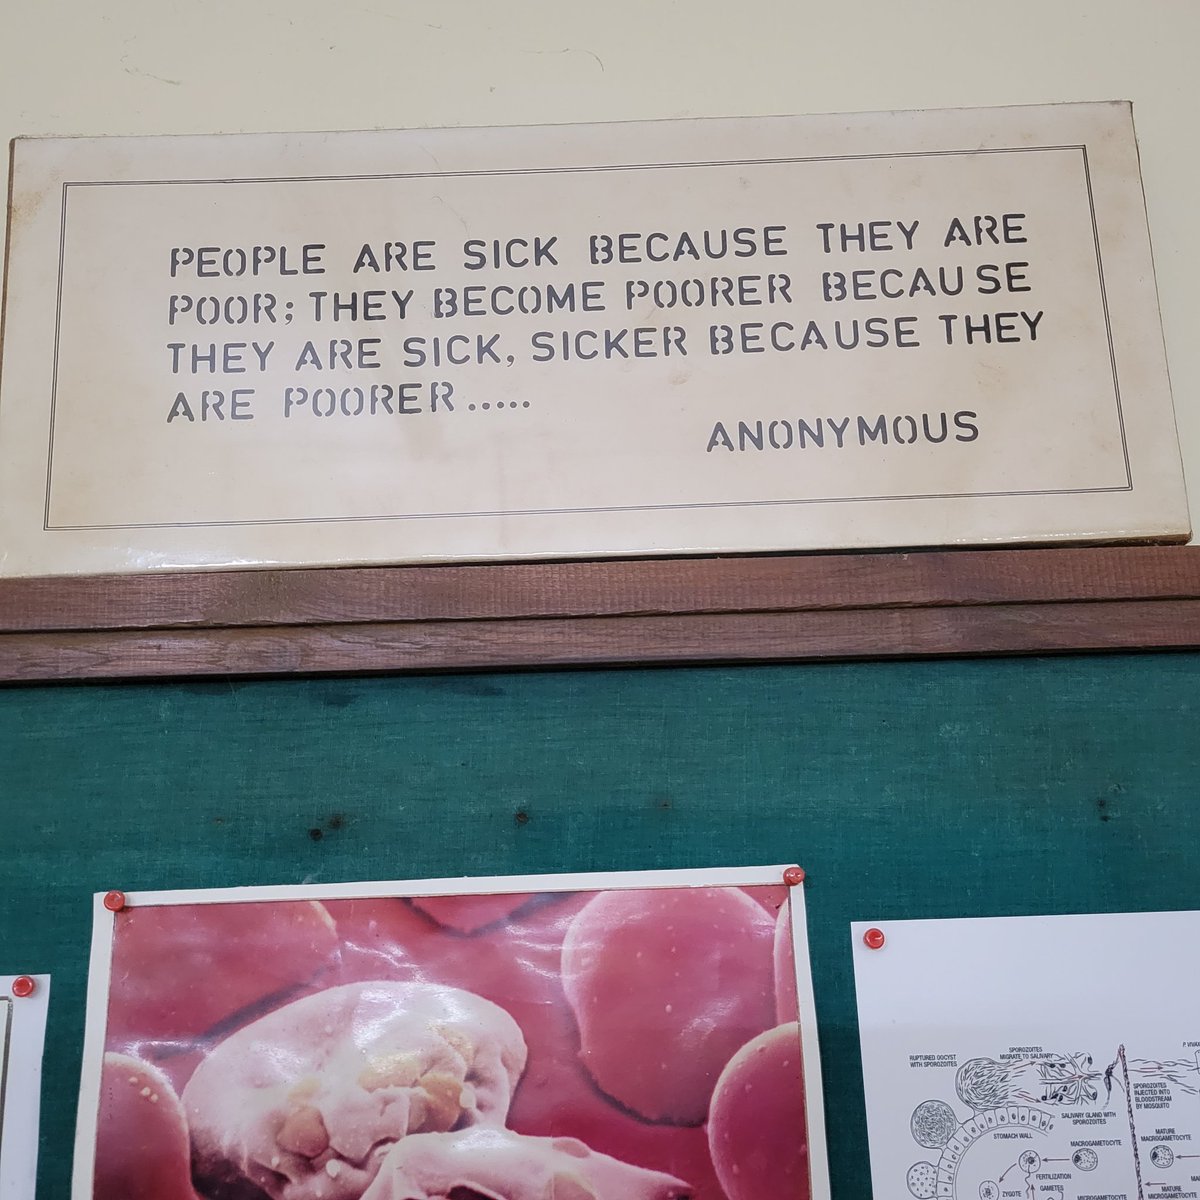 Saw this sign at a hospital in Nadiad. I think this sentiment is appropriate to share on #WorldMalariaDay, as malaria is one of the key infectious diseases that contributes to poverty traps worldwide.